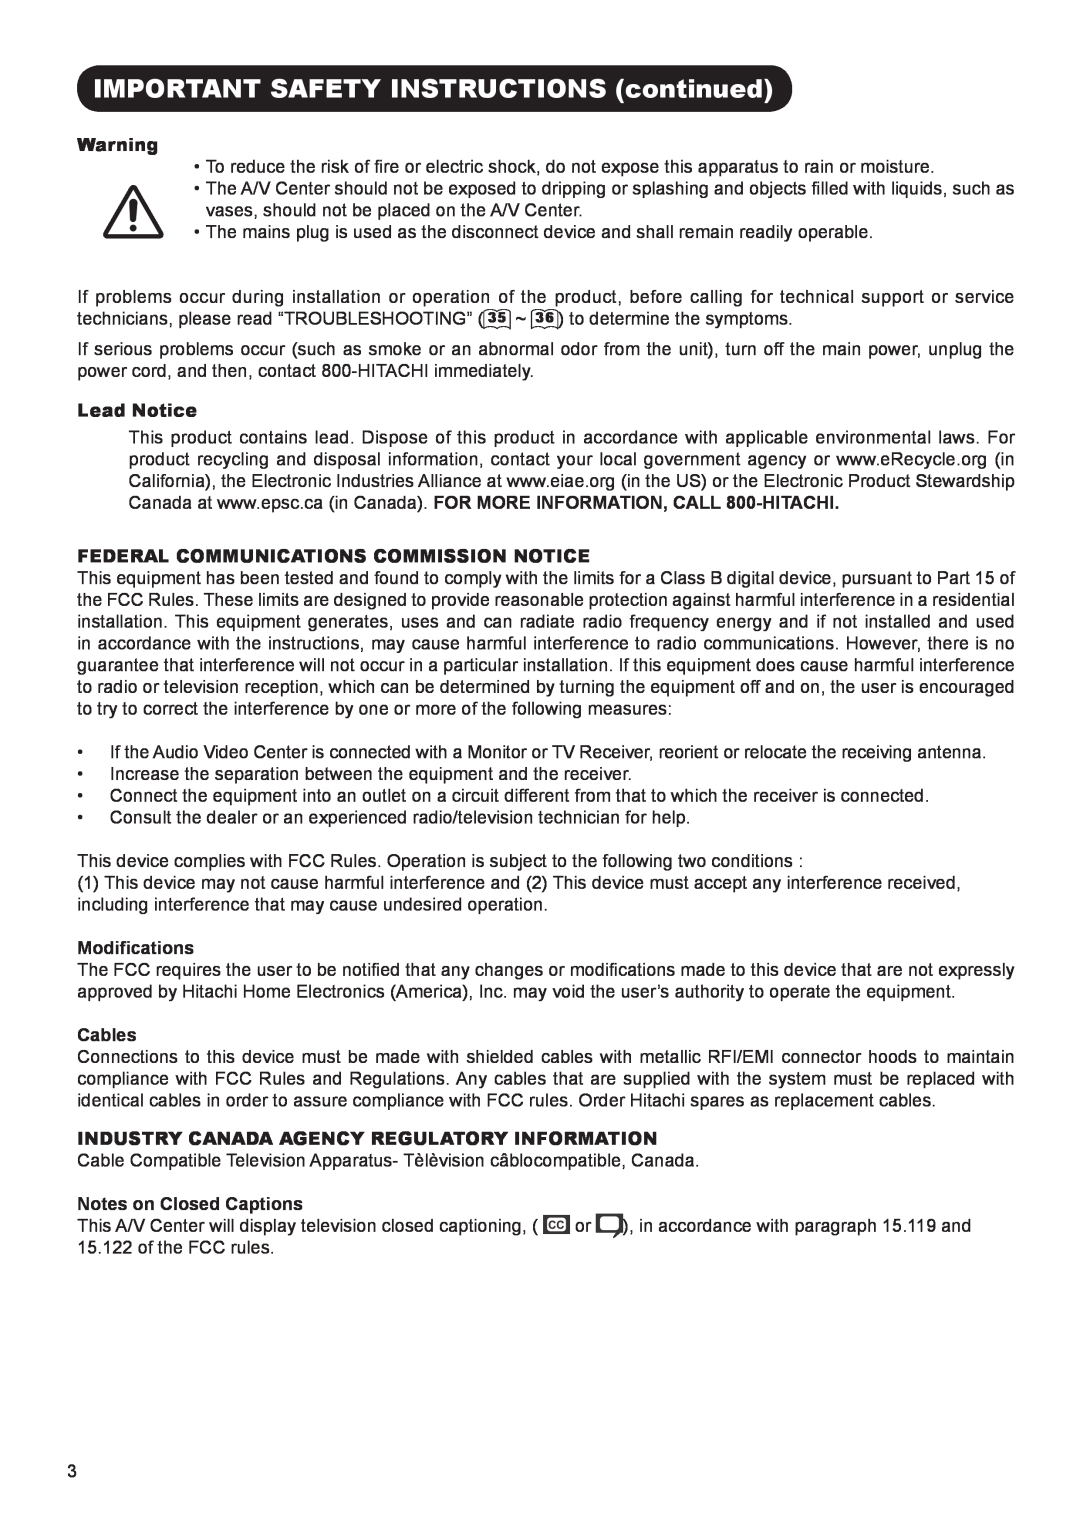 Hitachi AVC01U Lead Notice, Federal Communications Commission Notice, Modifications, Cables, Notes on Closed Captions 